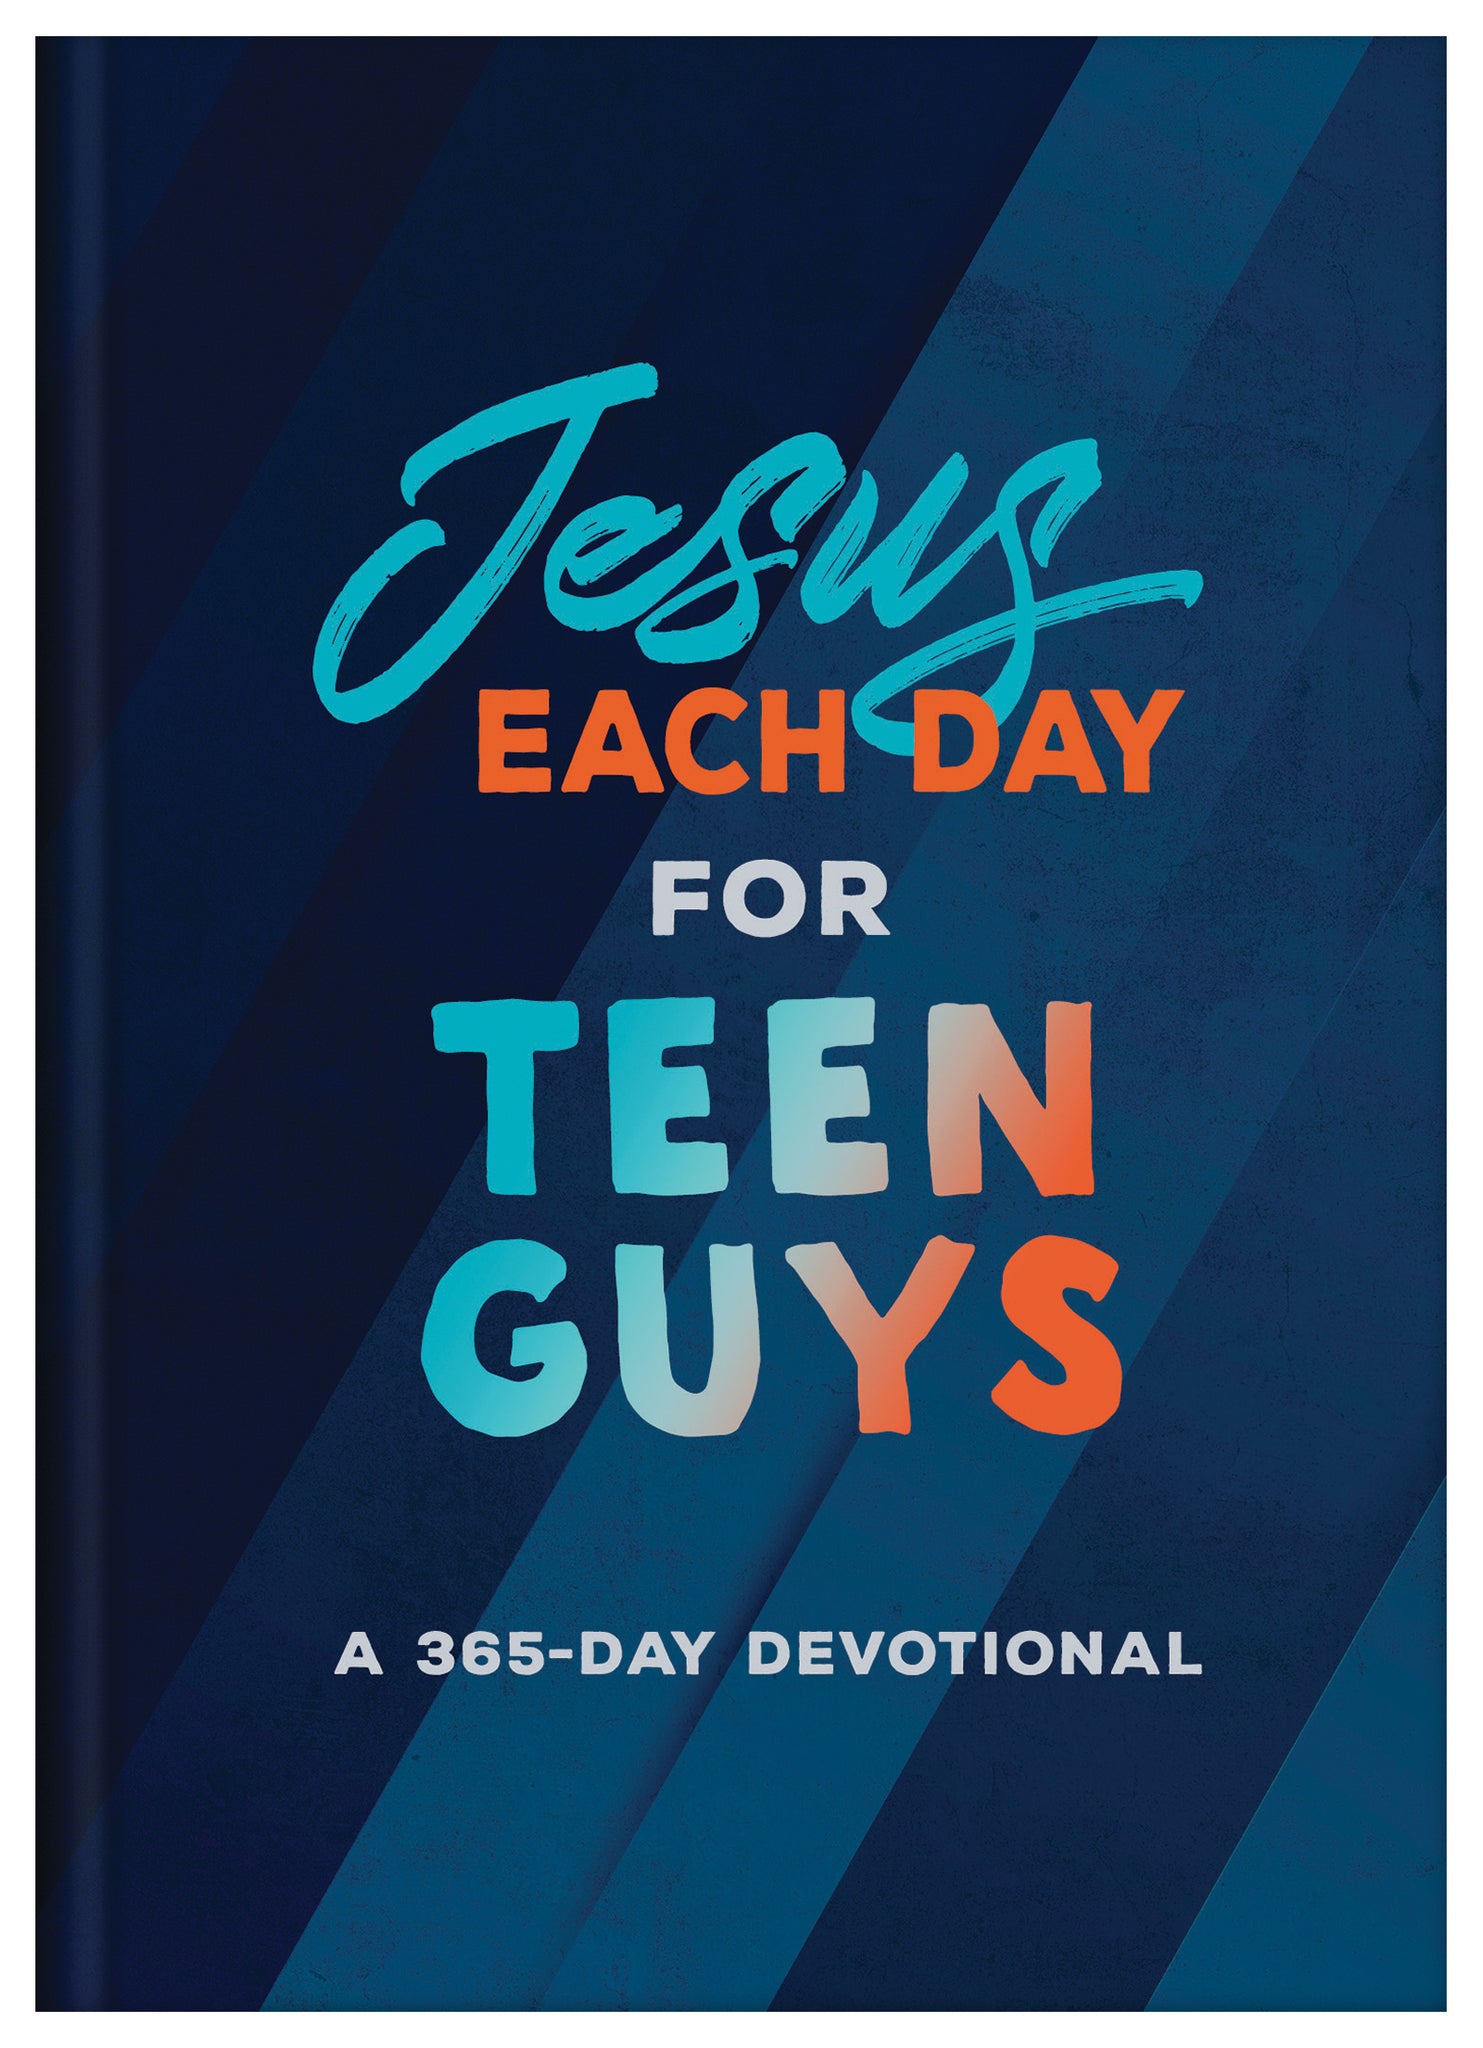 Jesus Each Day for Teen Guys-Grace & Blossom Boutique, a women's online fashion boutique located in Odessa, Florida